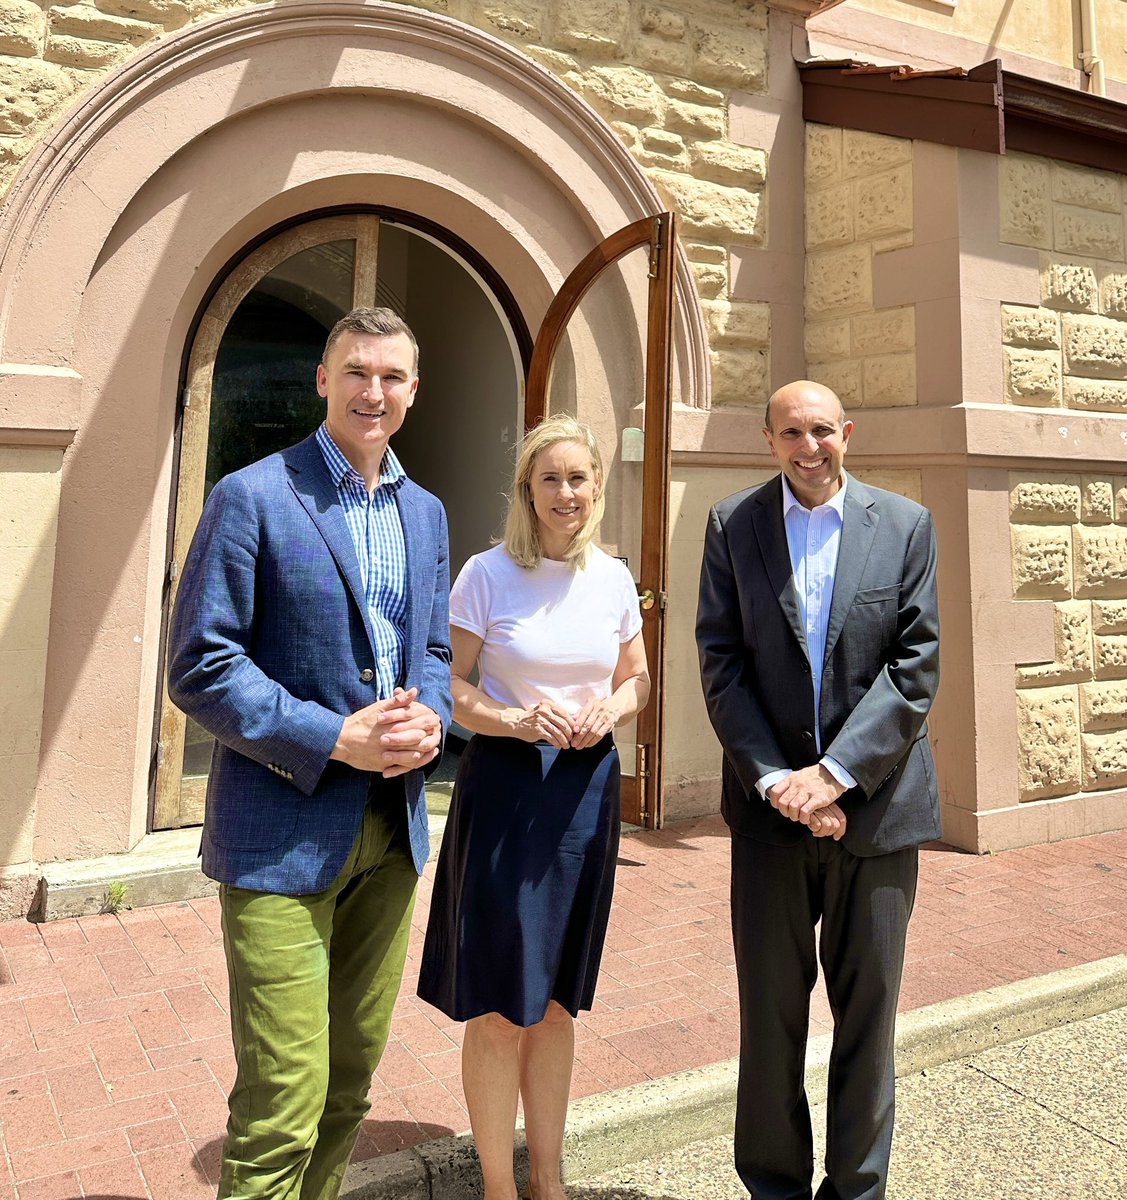 In Freo today to announce we’re providing $7.5 million to fund 28 new social housing at St Pats Fremantle. This funding will provide long-term accommodation for people who are experiencing homelessness with wrap around support provided by St Barts to help sustain the tenancies.